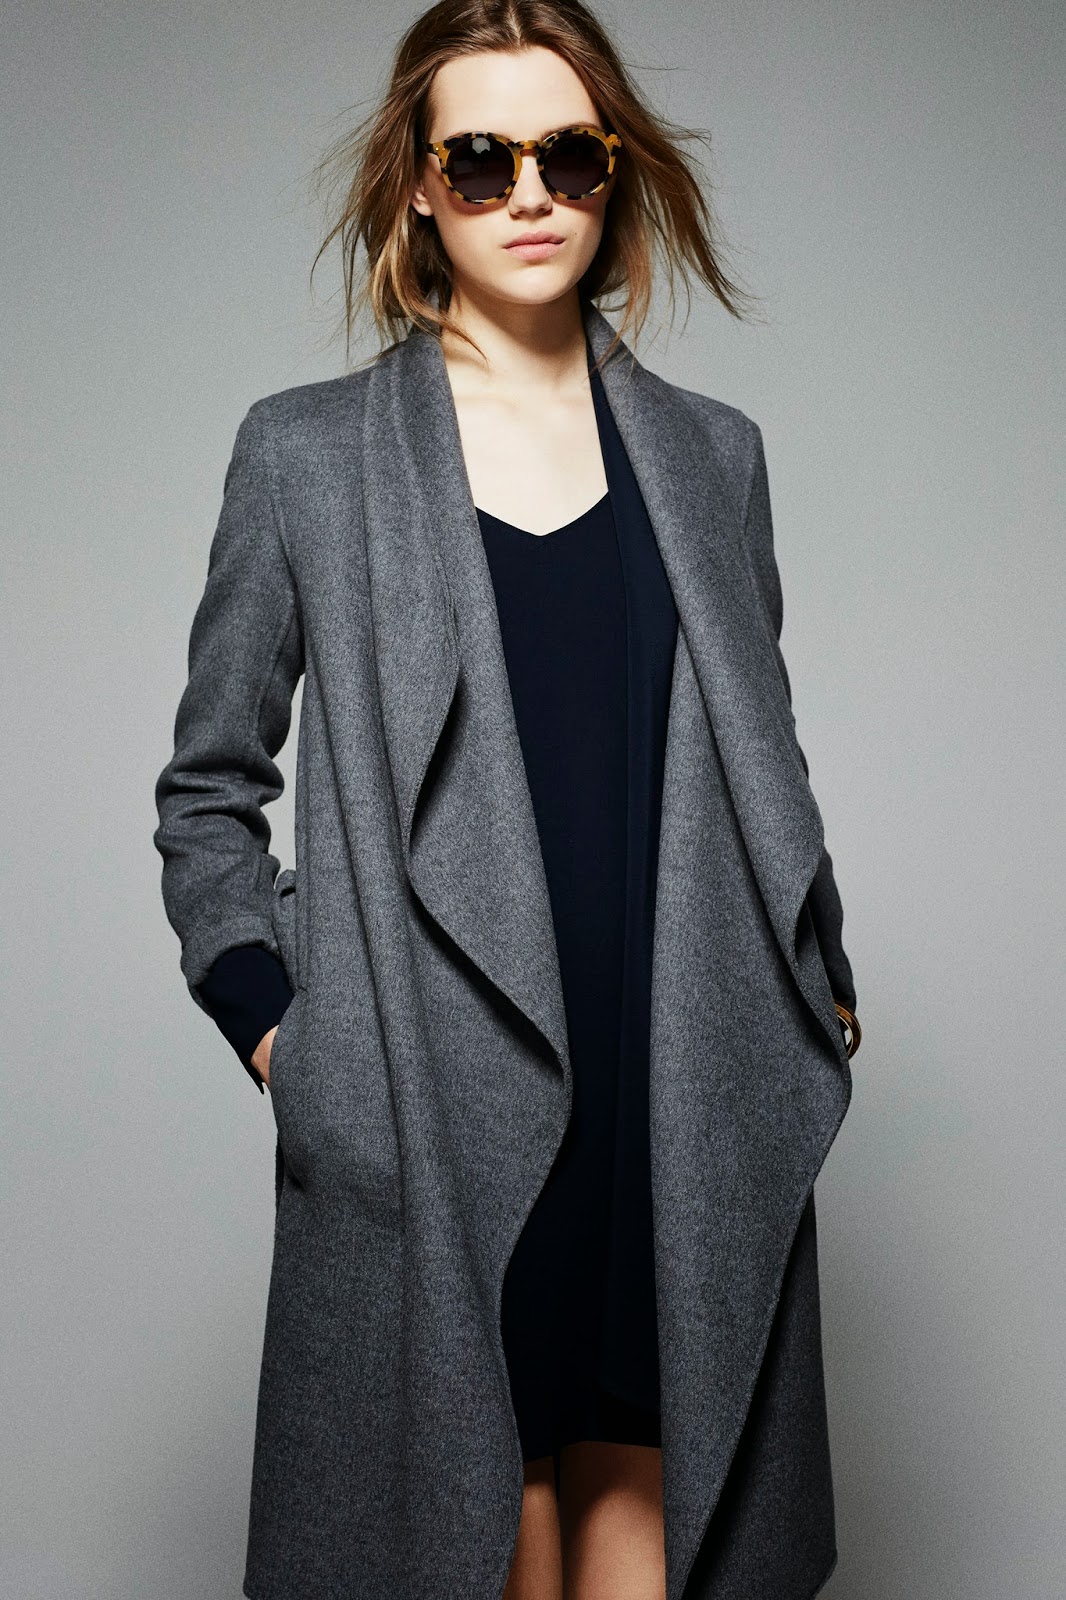 DAME SKARLETTE : Massimo Dutti collection AH 2014-2015